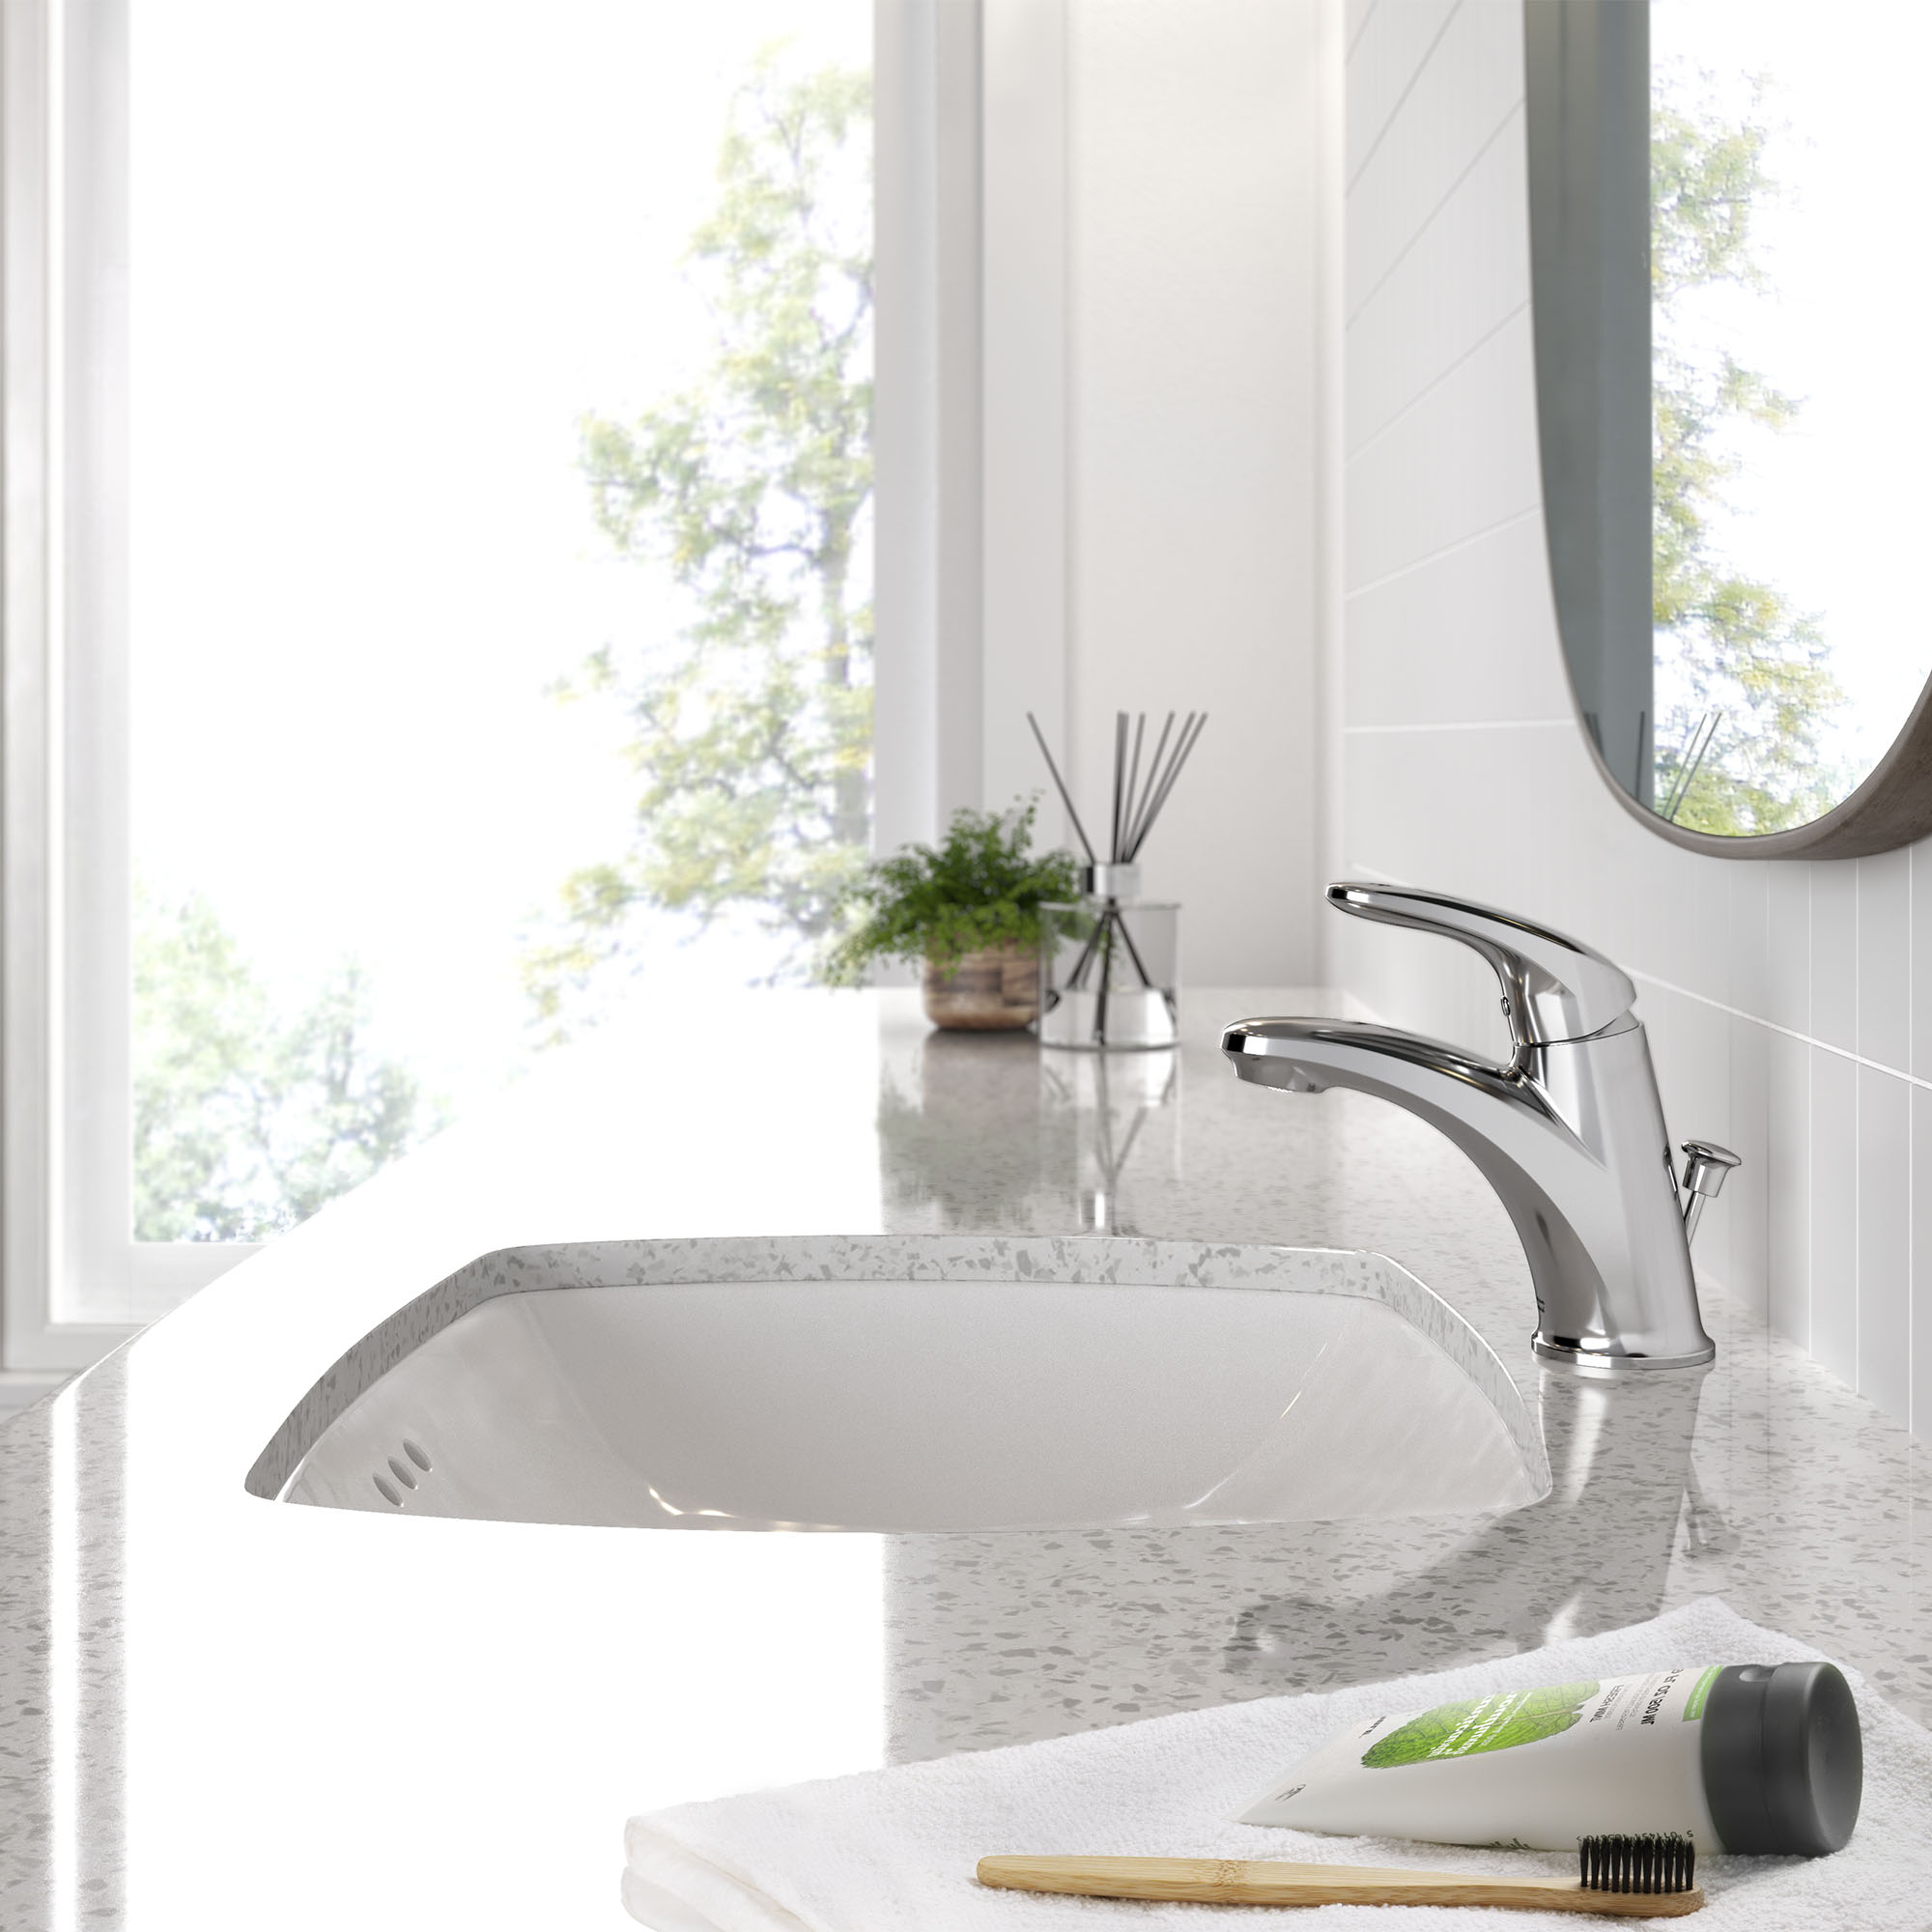 Colony™ PRO Single Hole Single-Handle Bathroom Faucet 1.2 gpm/4.5 L/min With Lever Handle